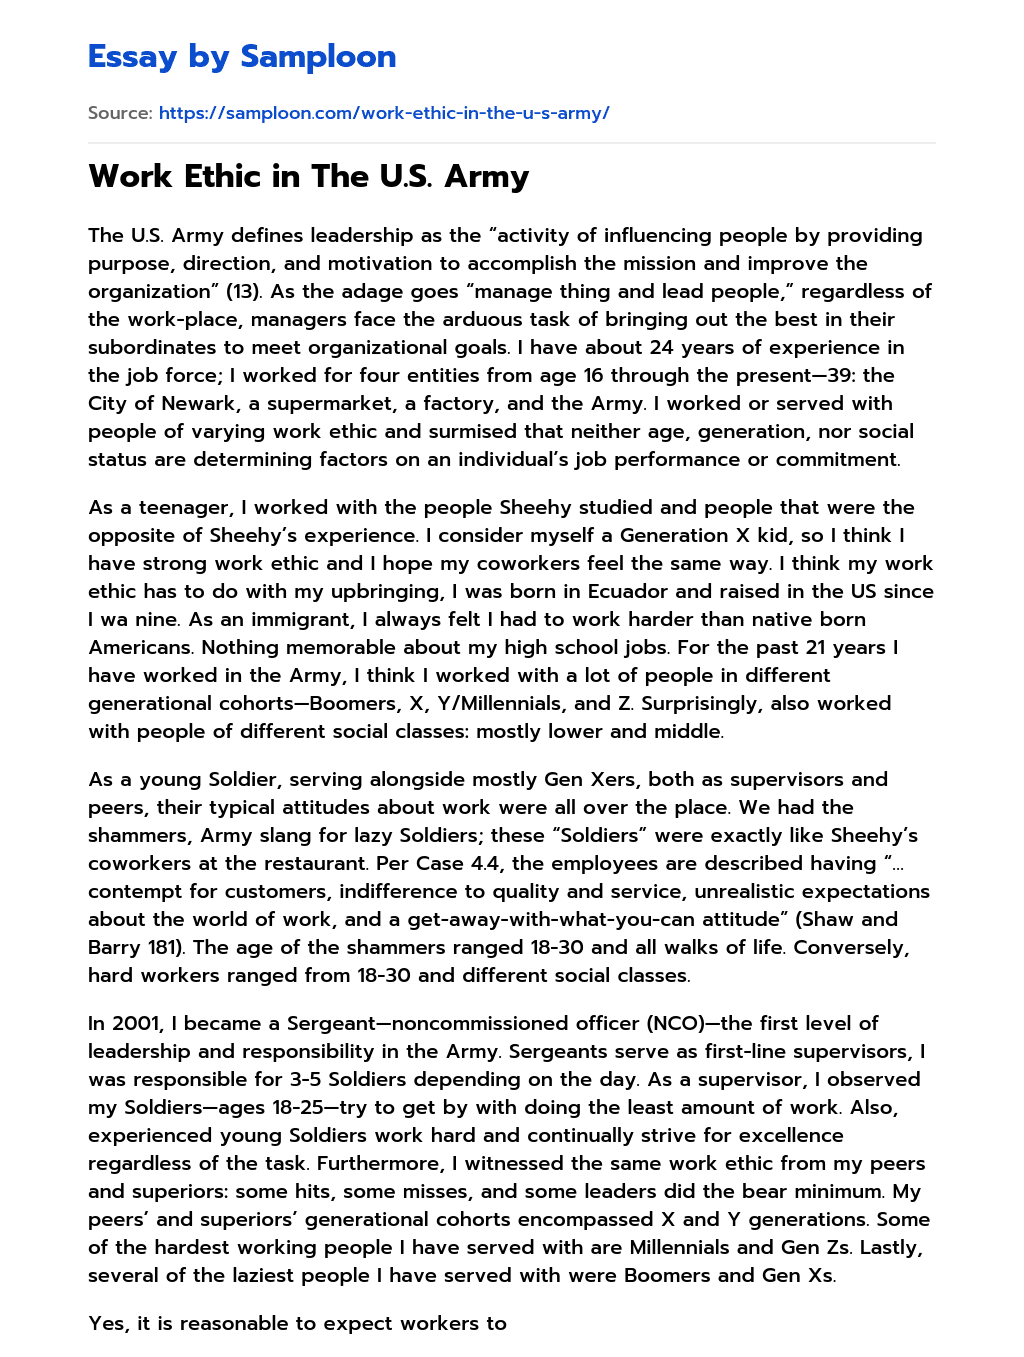 Work Ethic in The U.S. Army essay